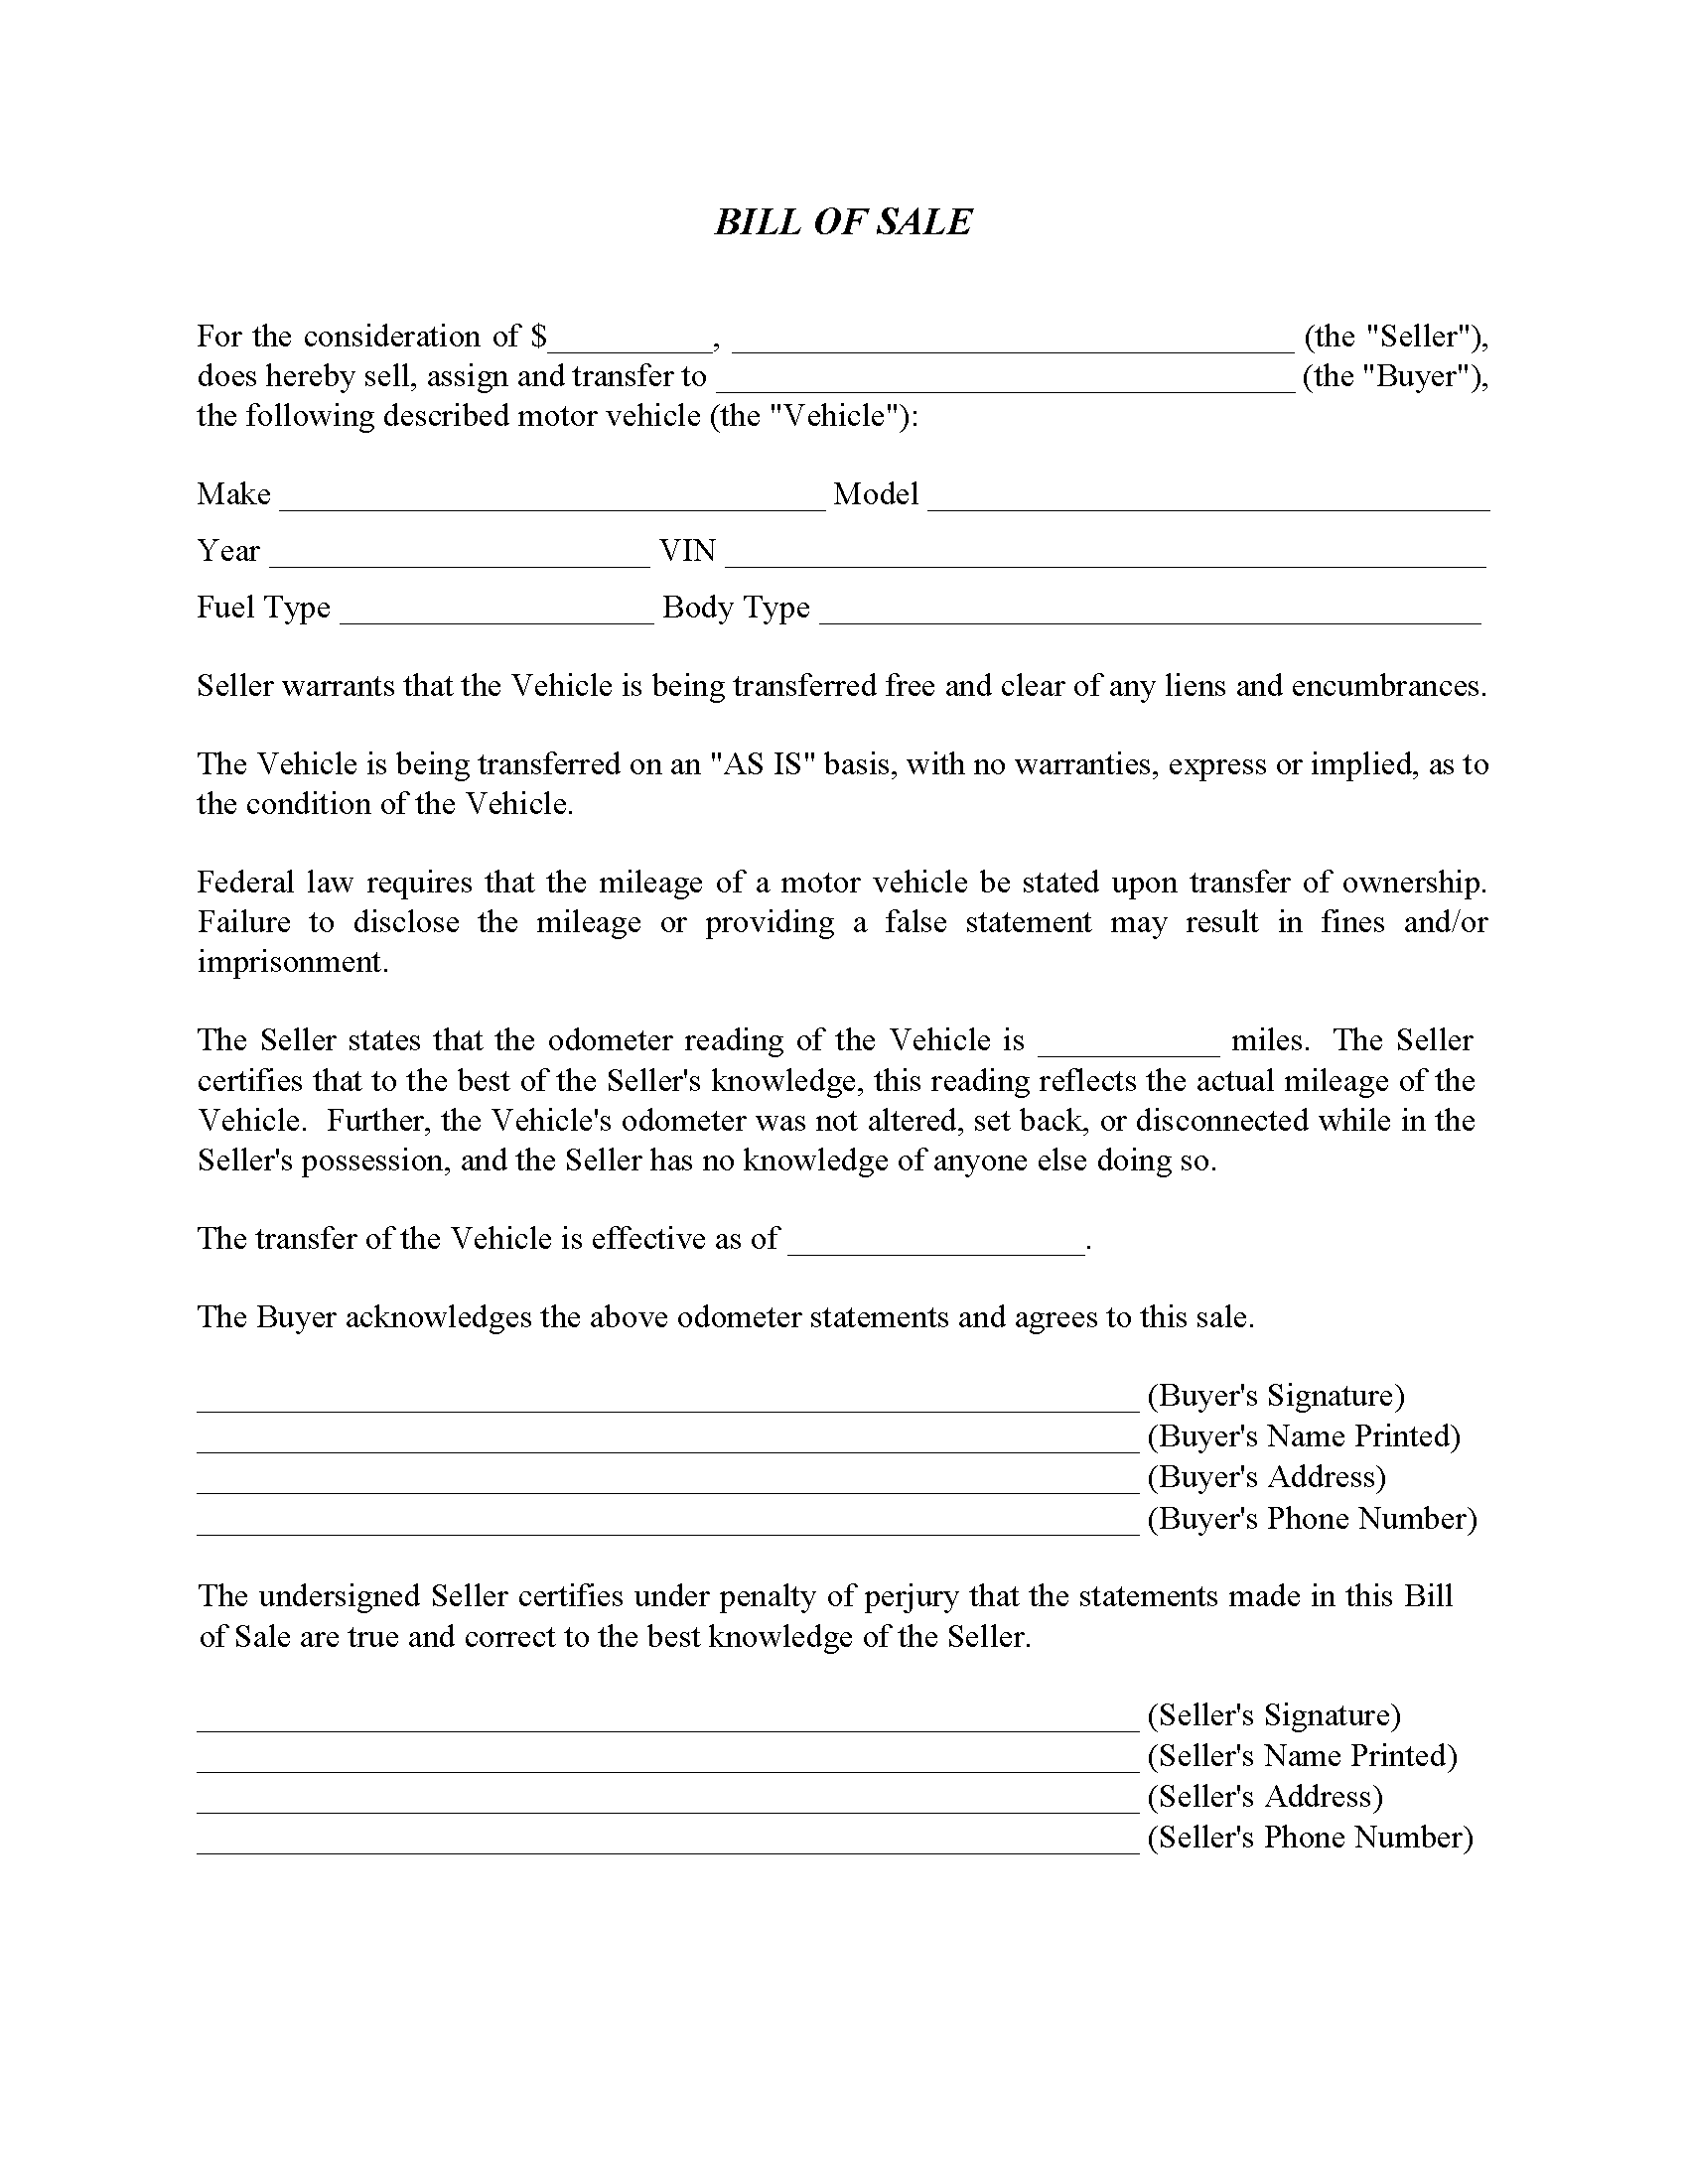 Oklahoma Motor Vehicle Bill of Sale Form - Free Printable Legal Forms